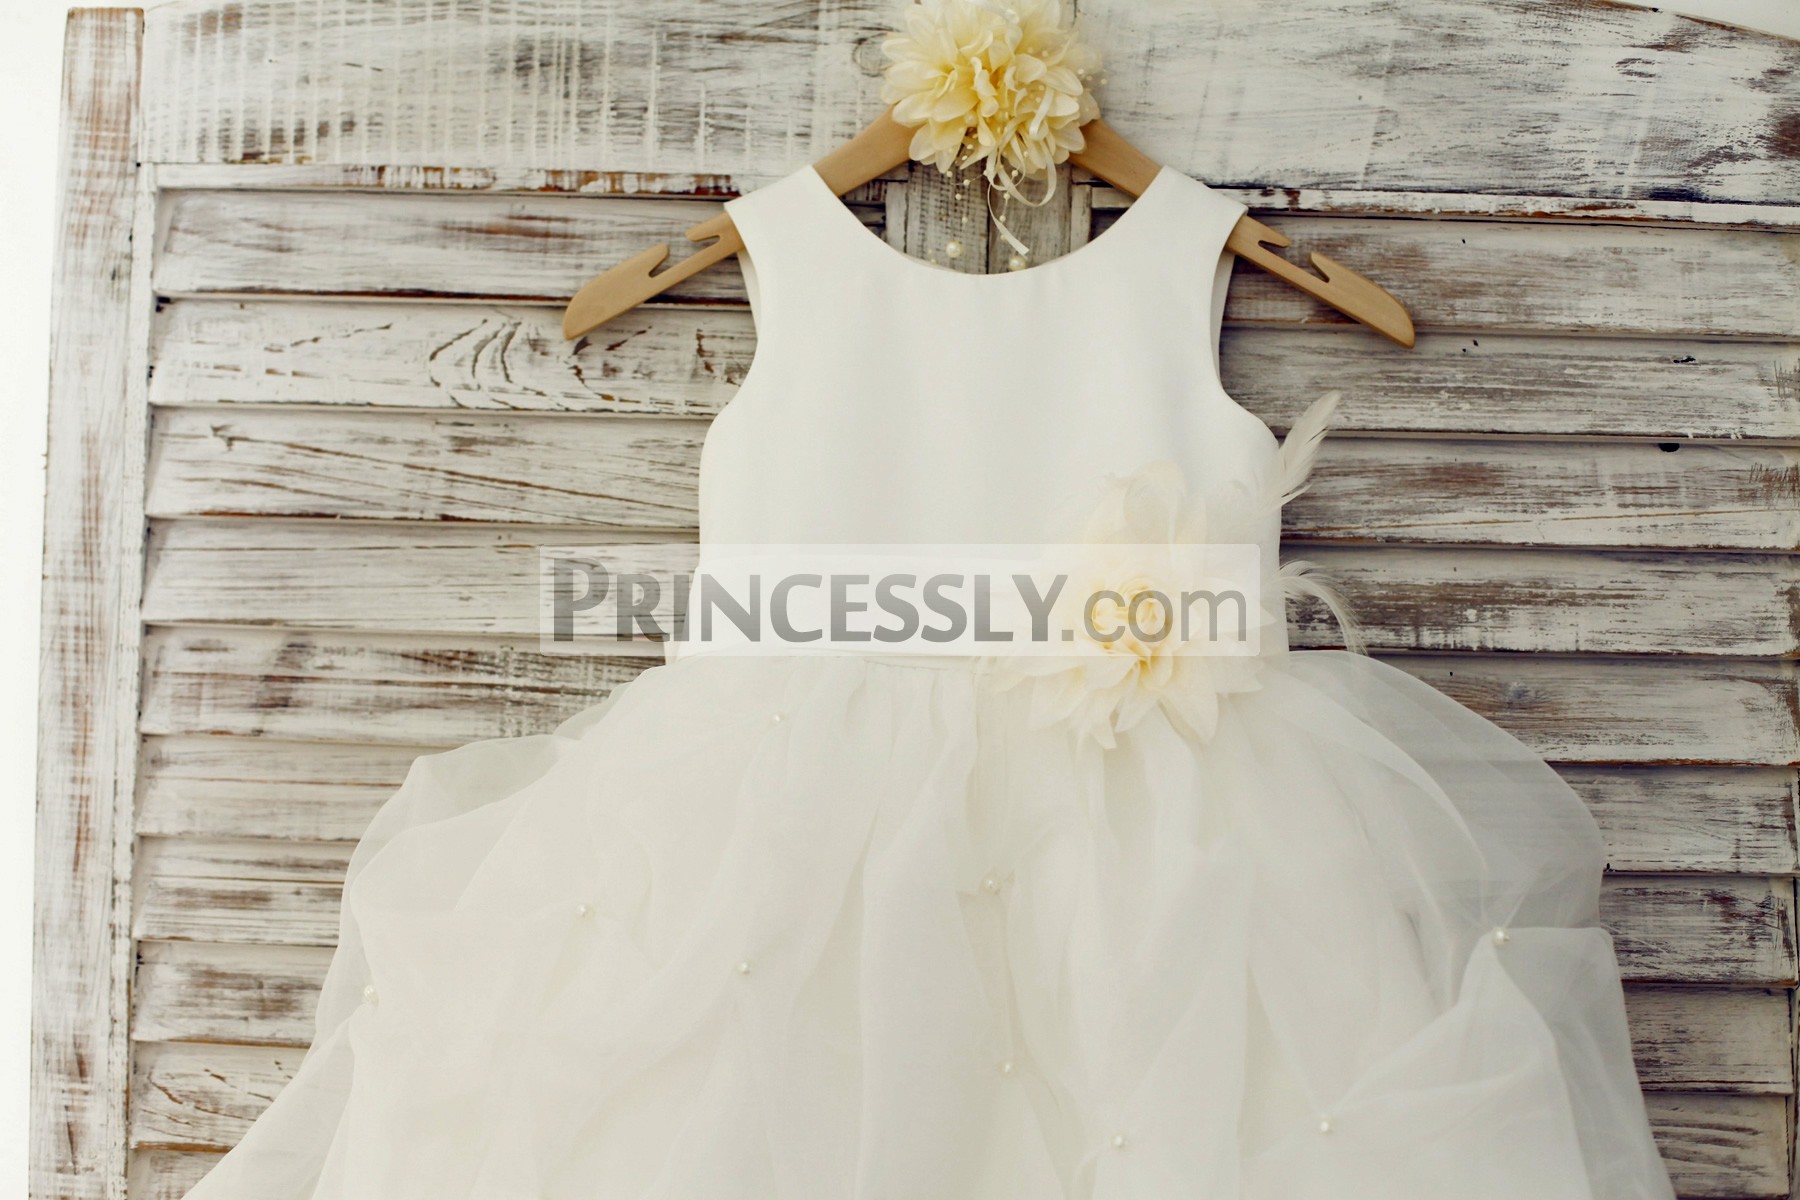 Scoop neckline and sleeveless bodice with belt and feather flower